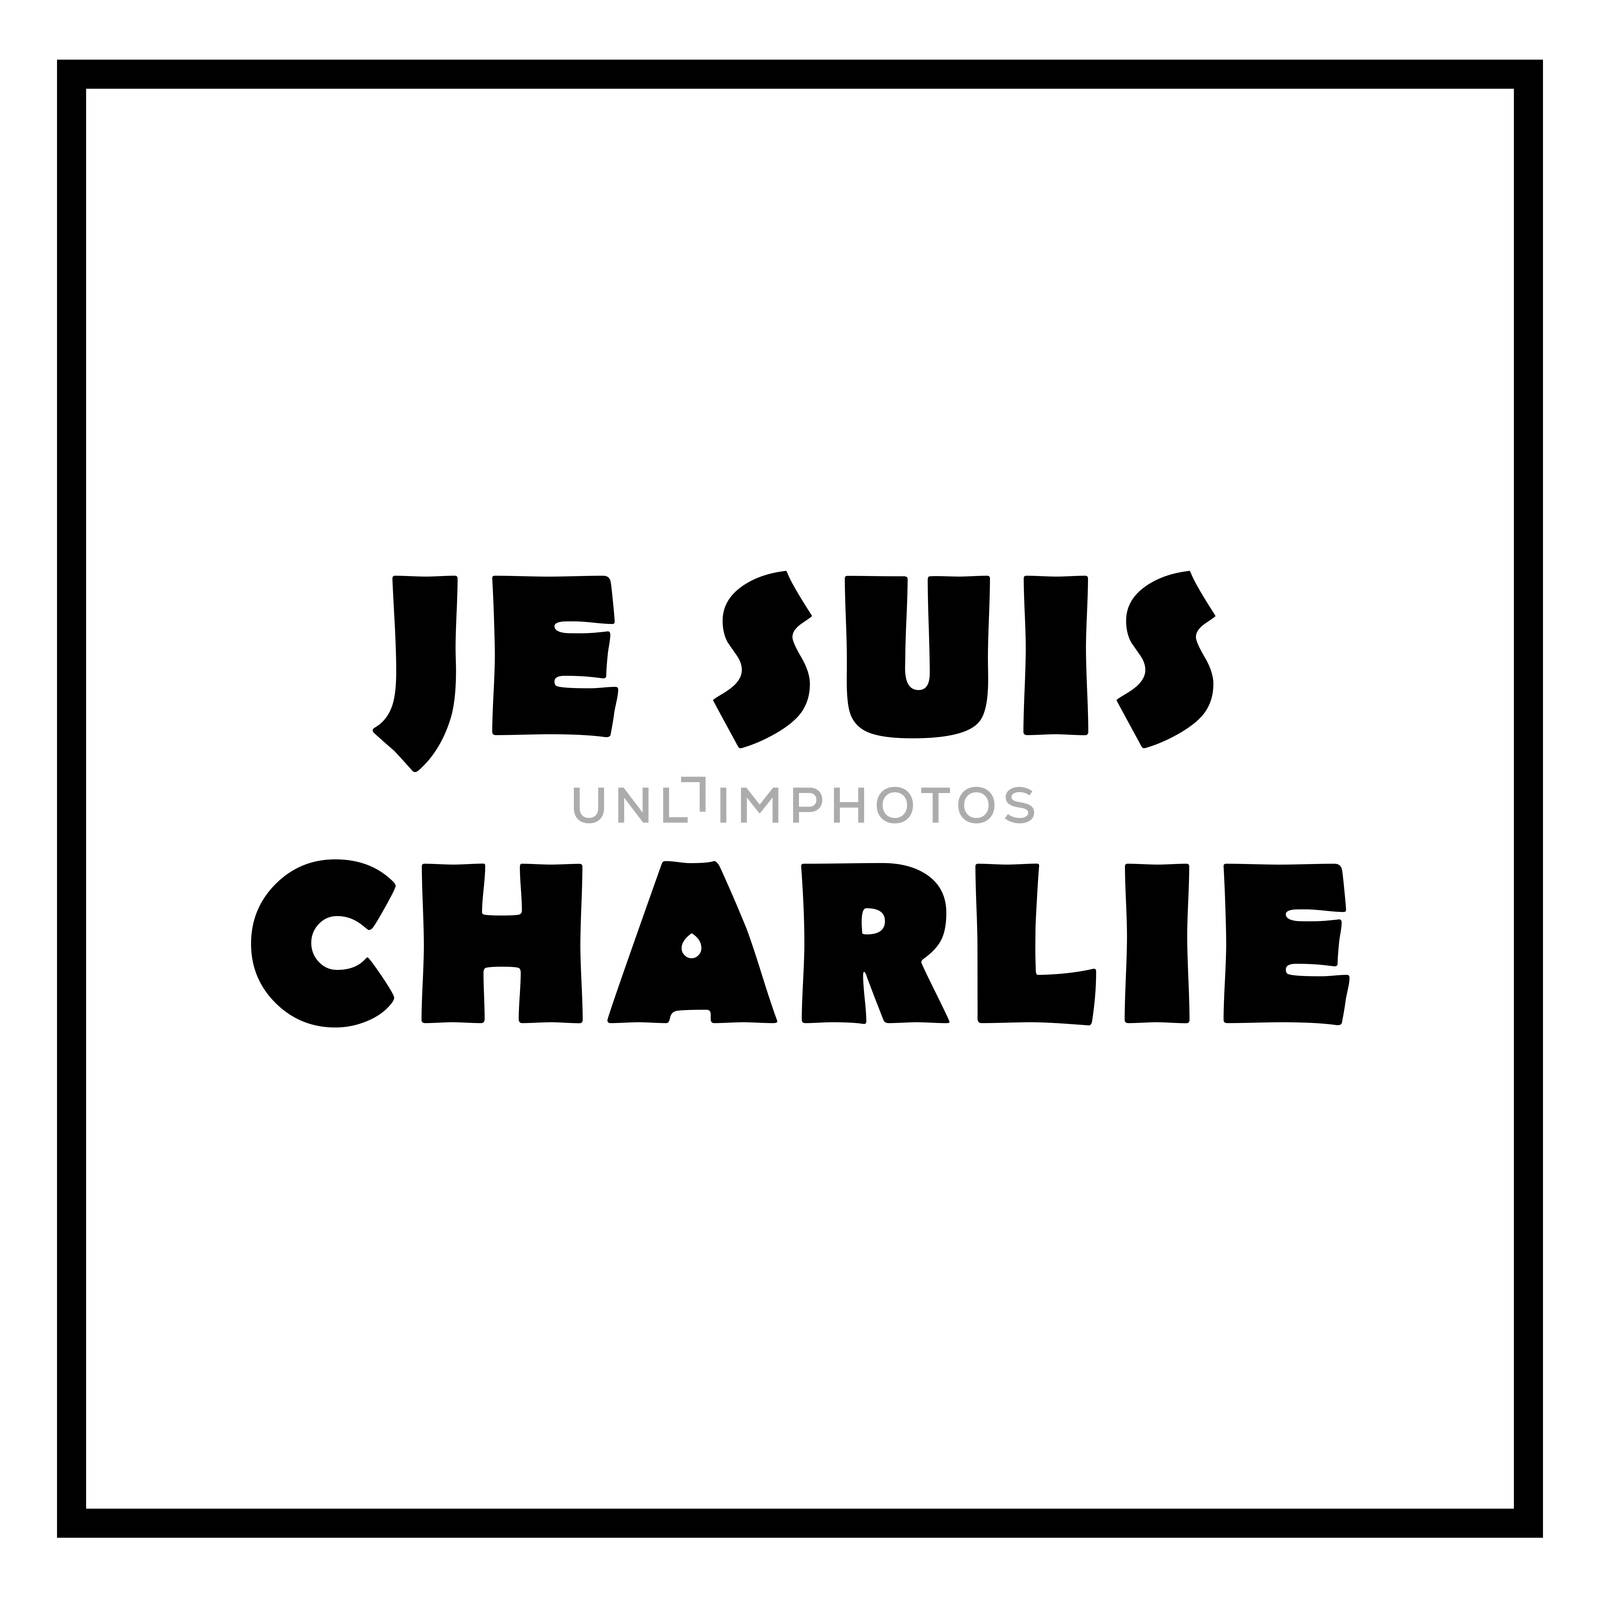 The text Je Suis Charlie on white background.